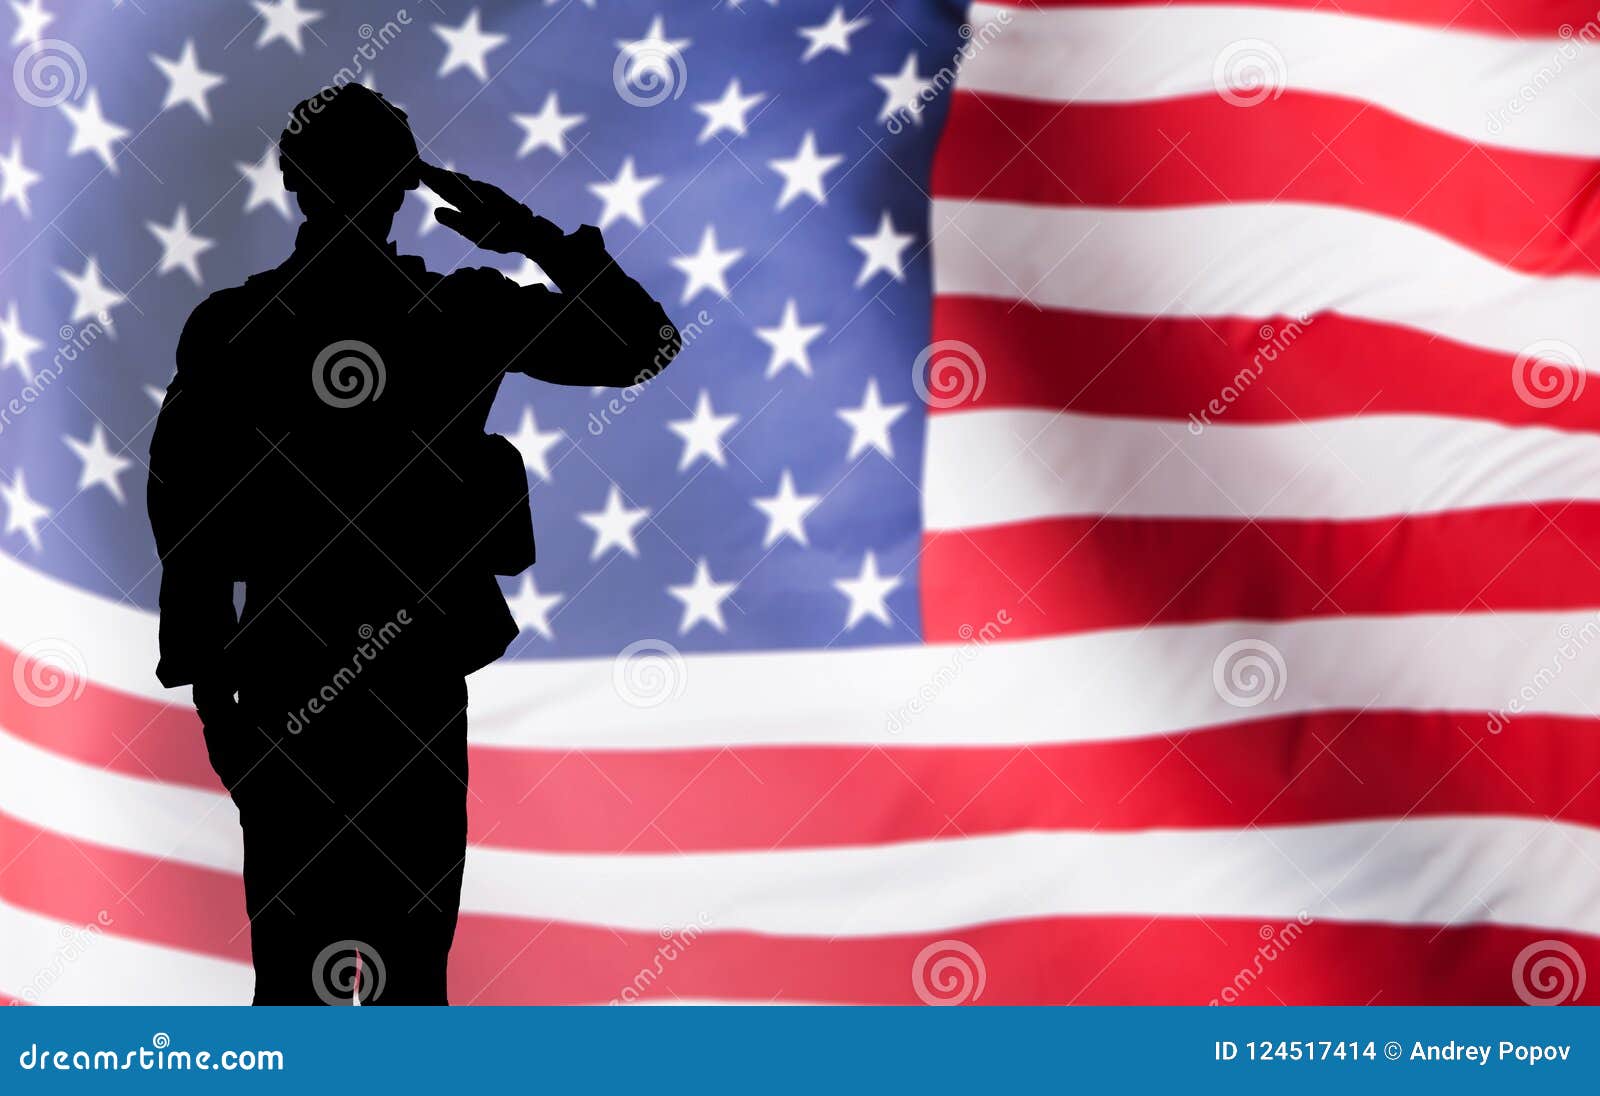 solider saluting against the american flag